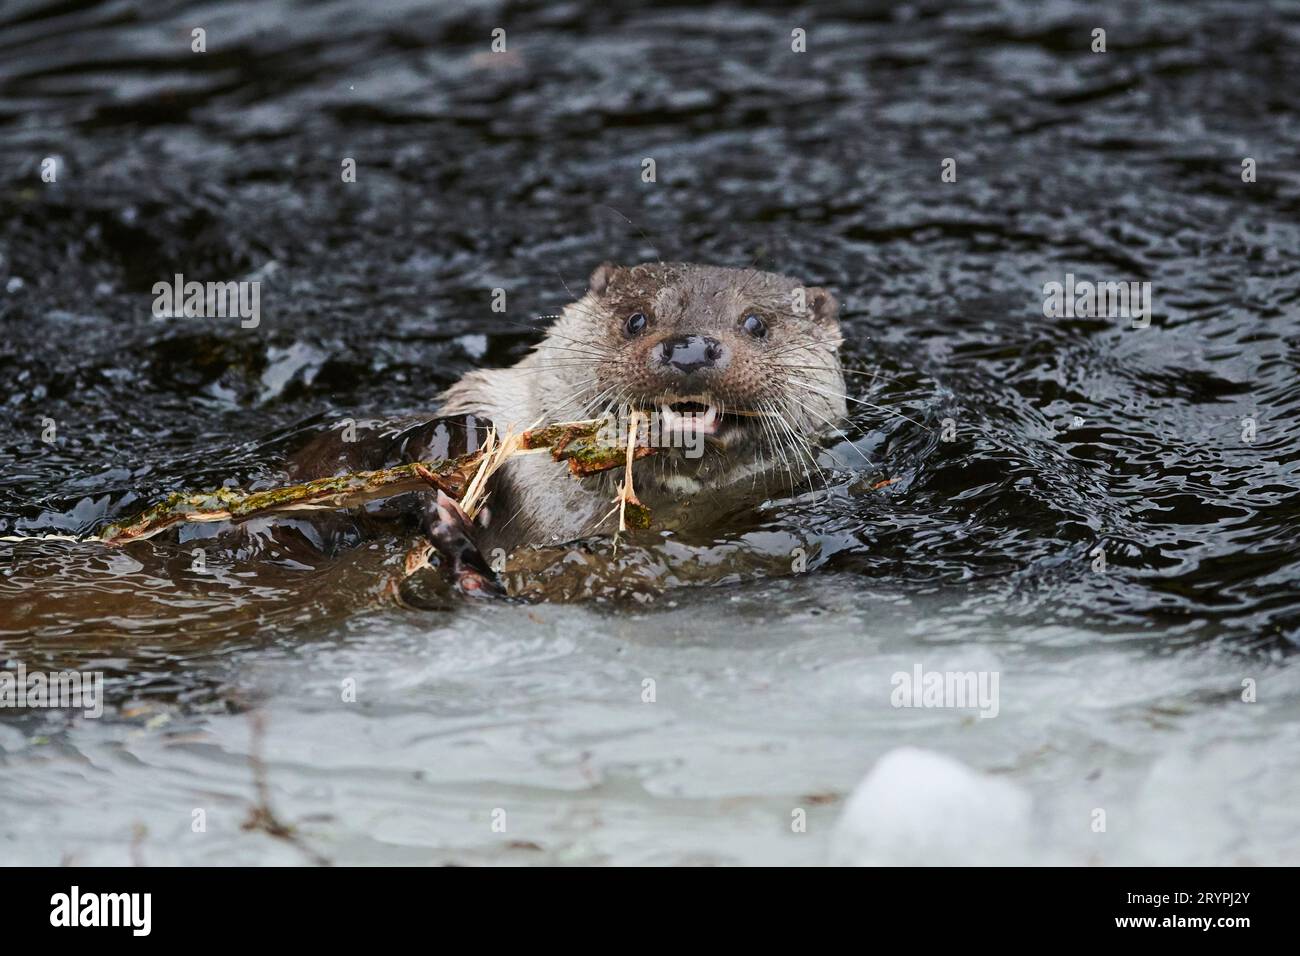 European River Otter (Lutra lutra) playing in icy water with a stick. Germany Stock Photo